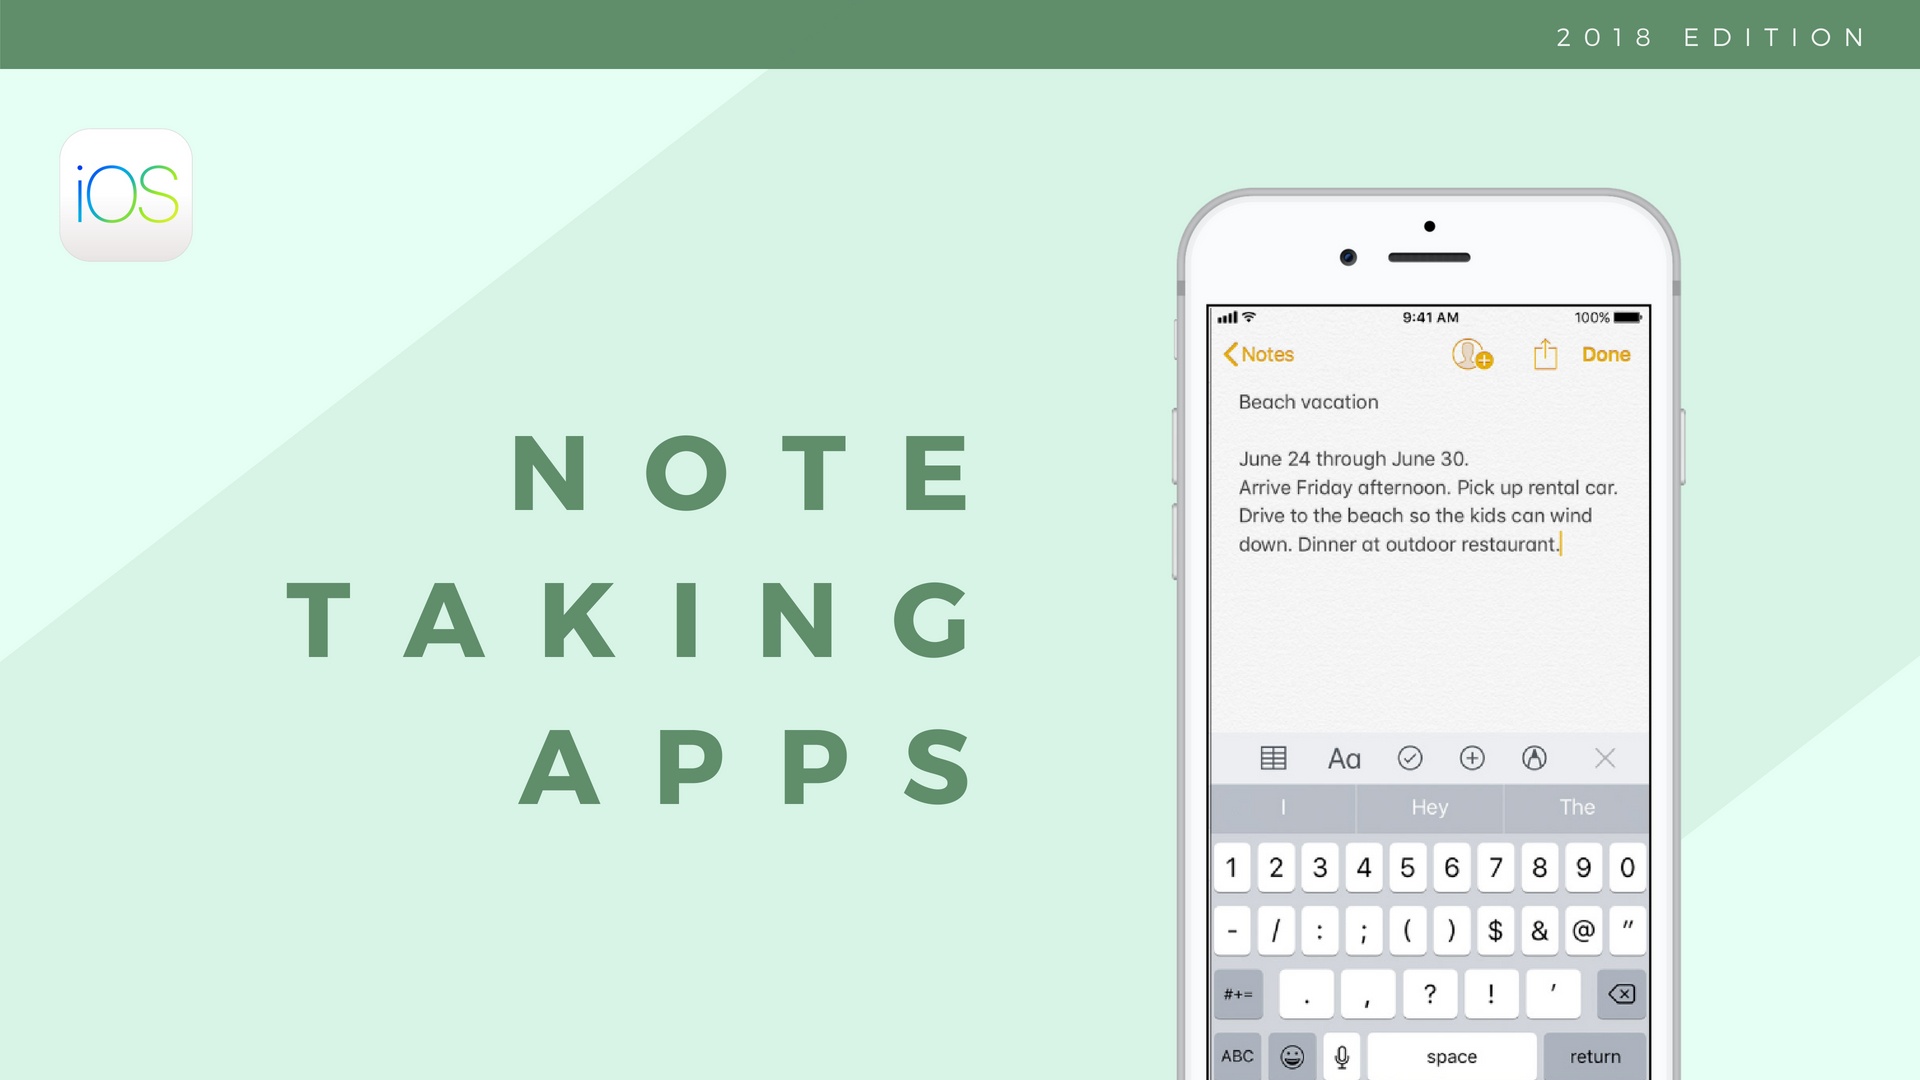 best free notes app for windows